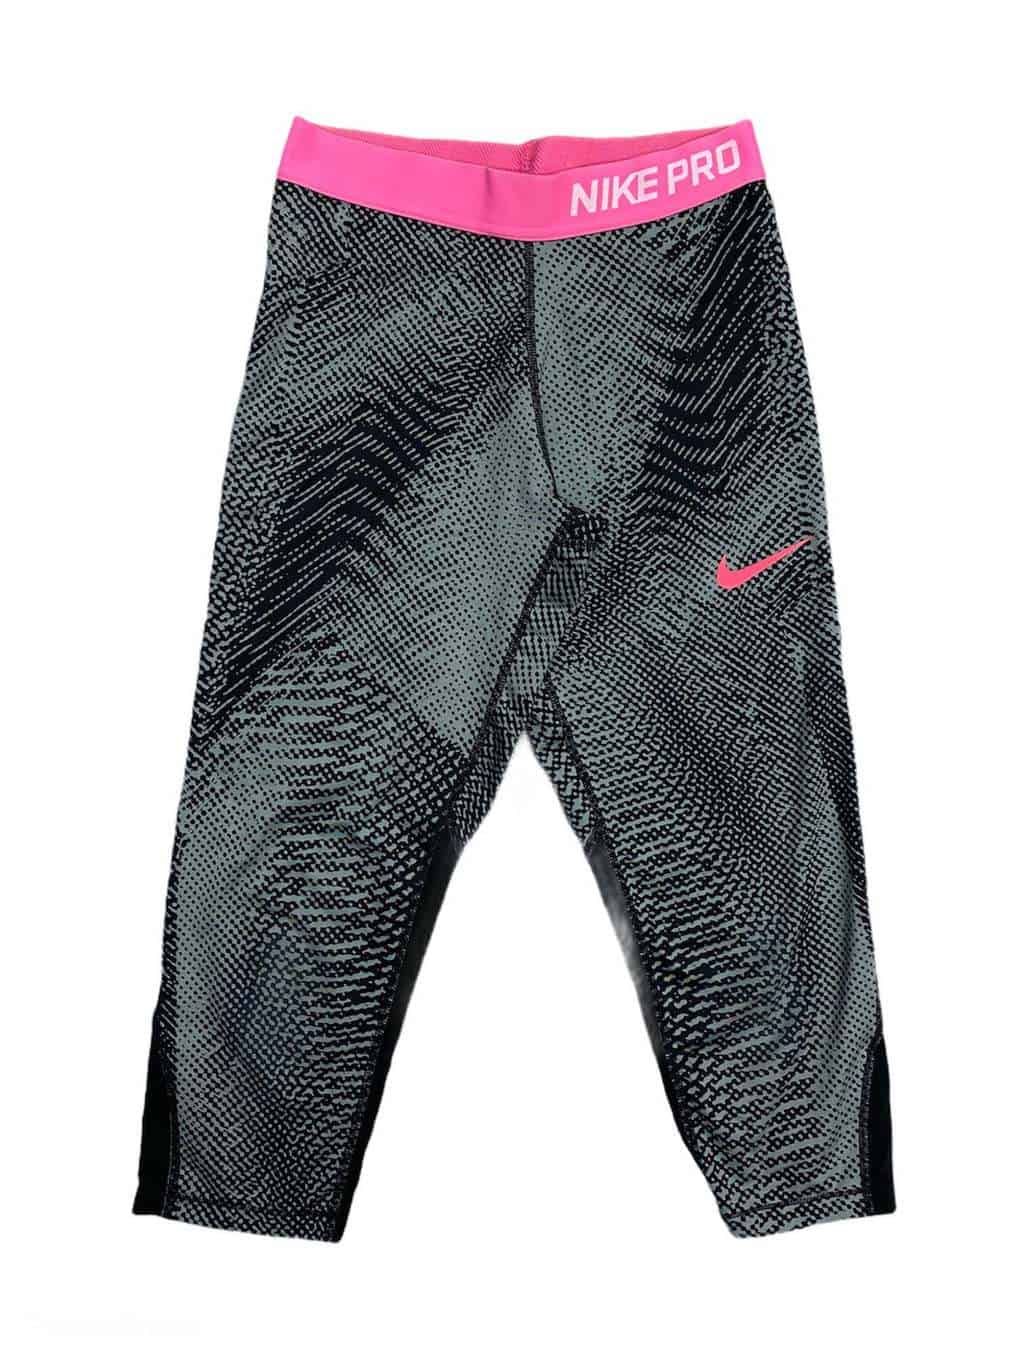 Women's Nike Pro 3/4 Length Leggings with Pink Waistband and